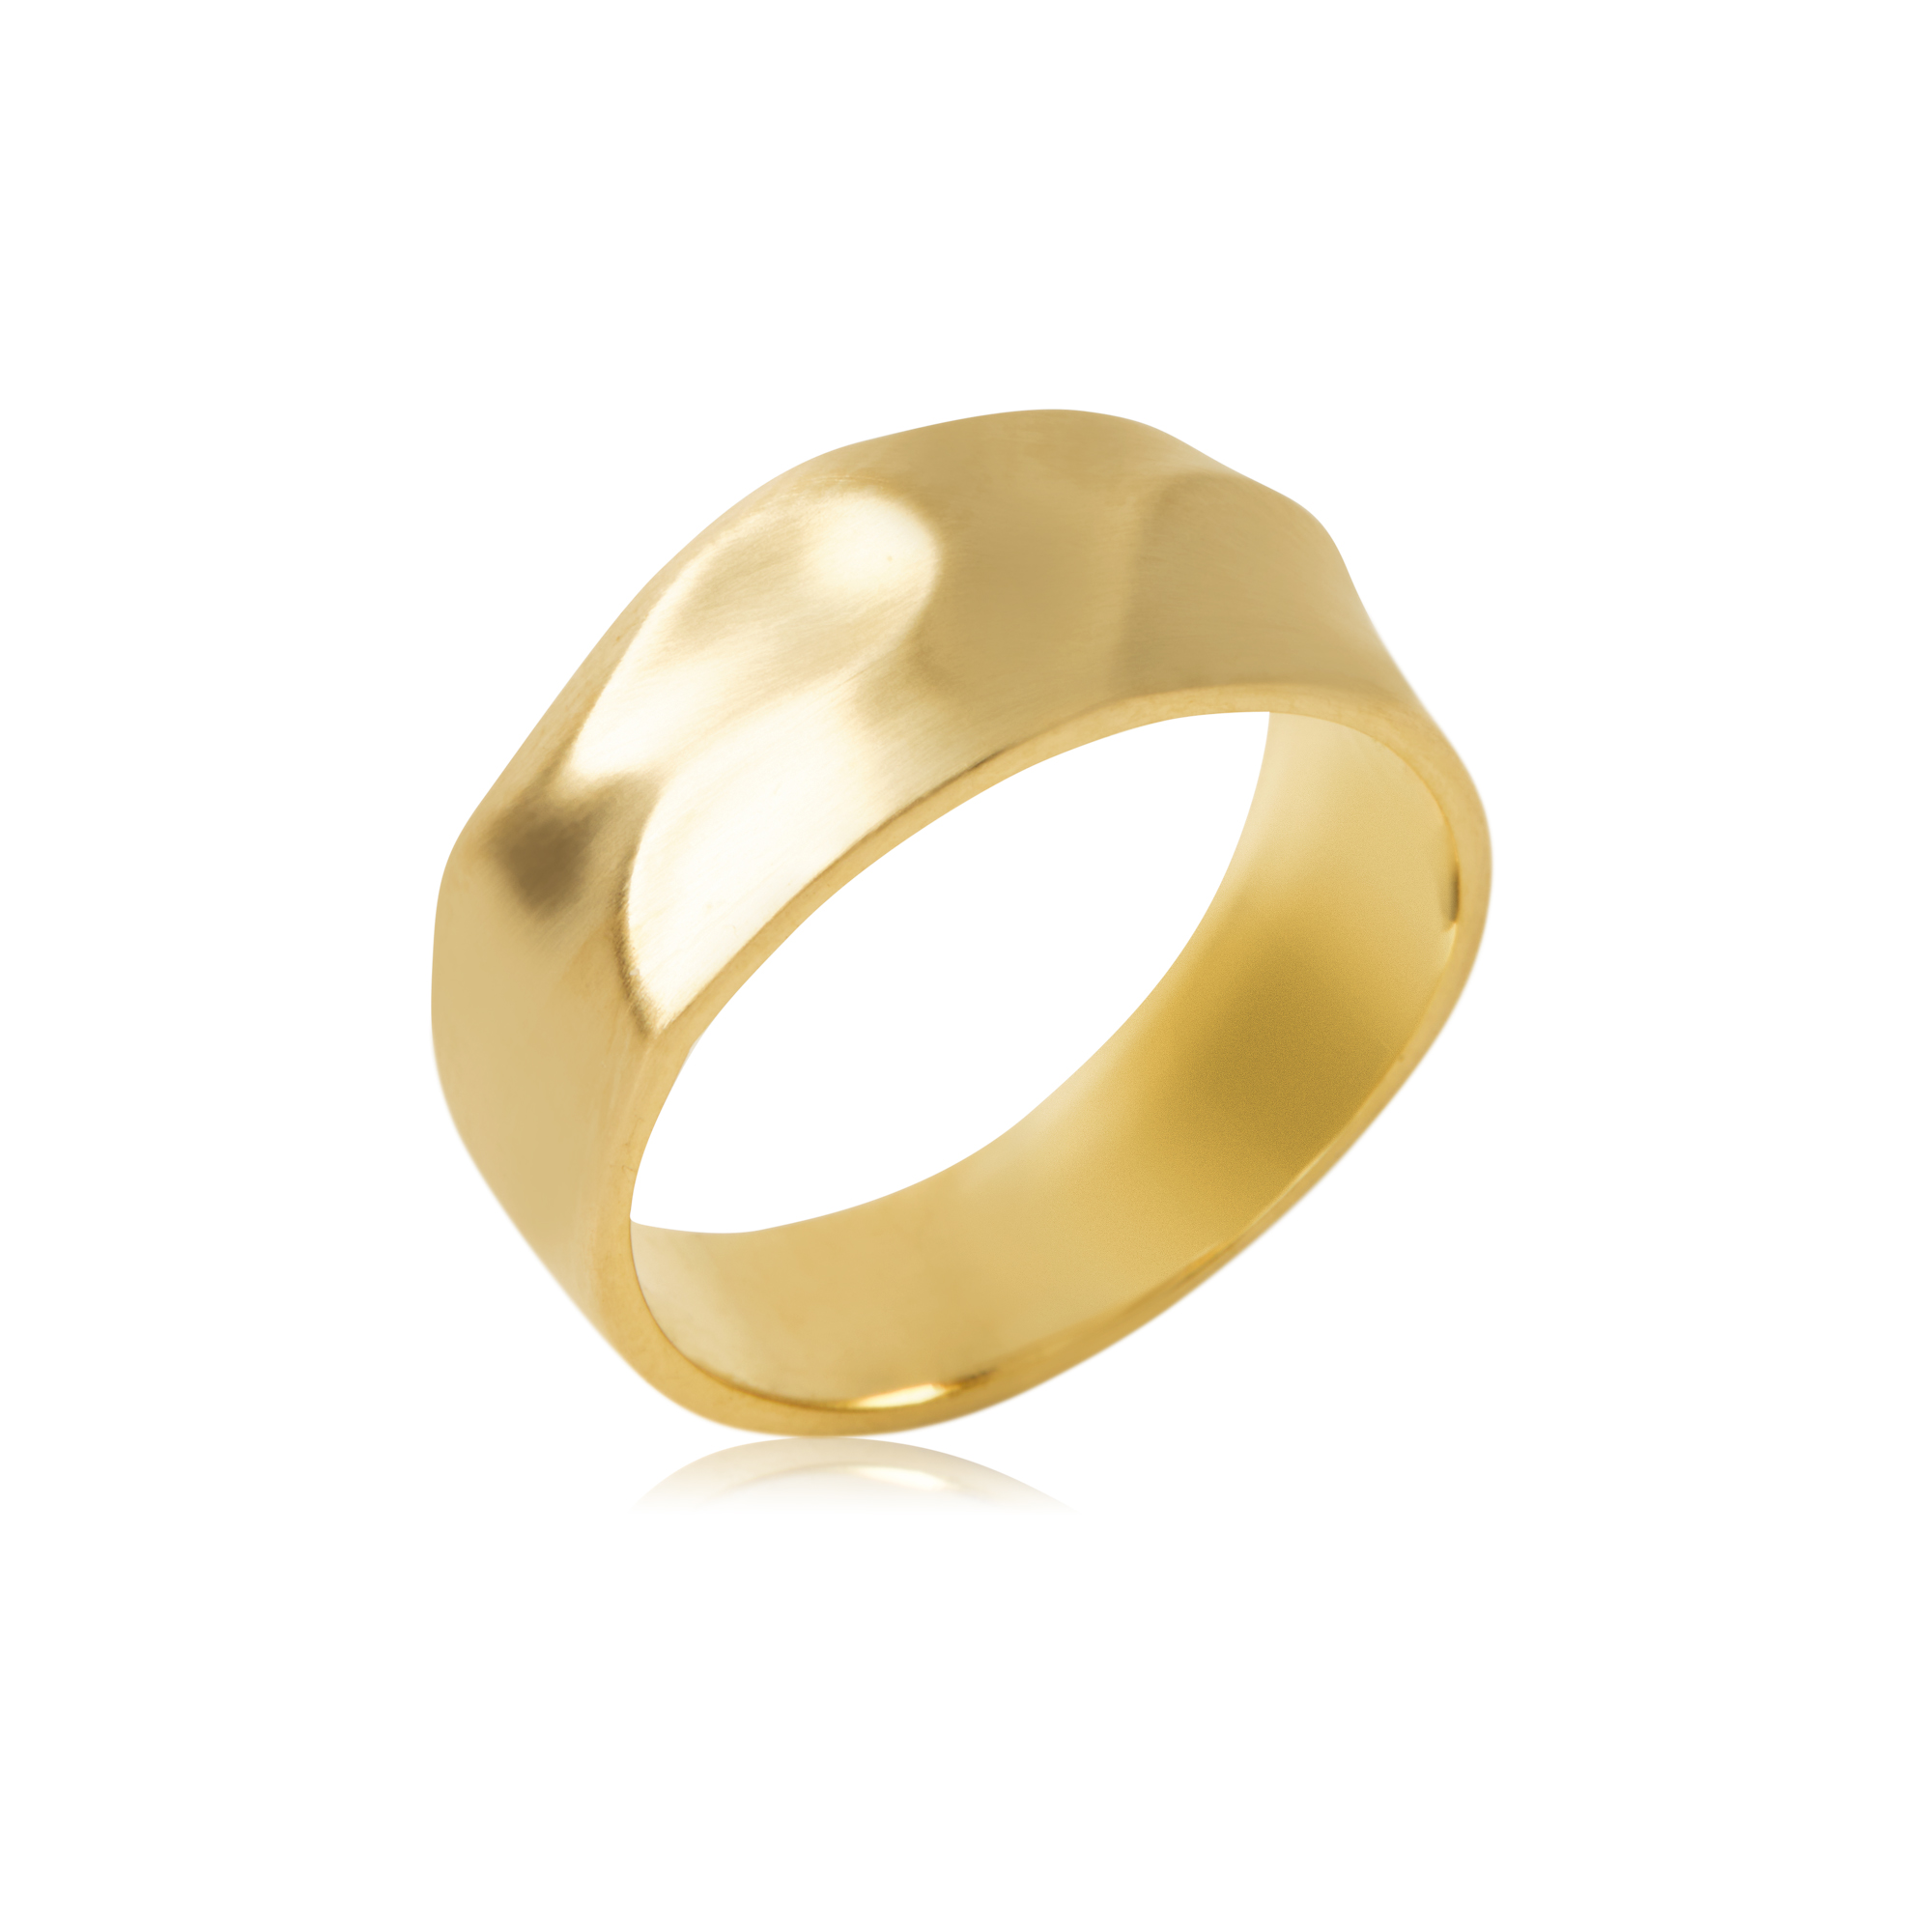 Wide gold wedding band